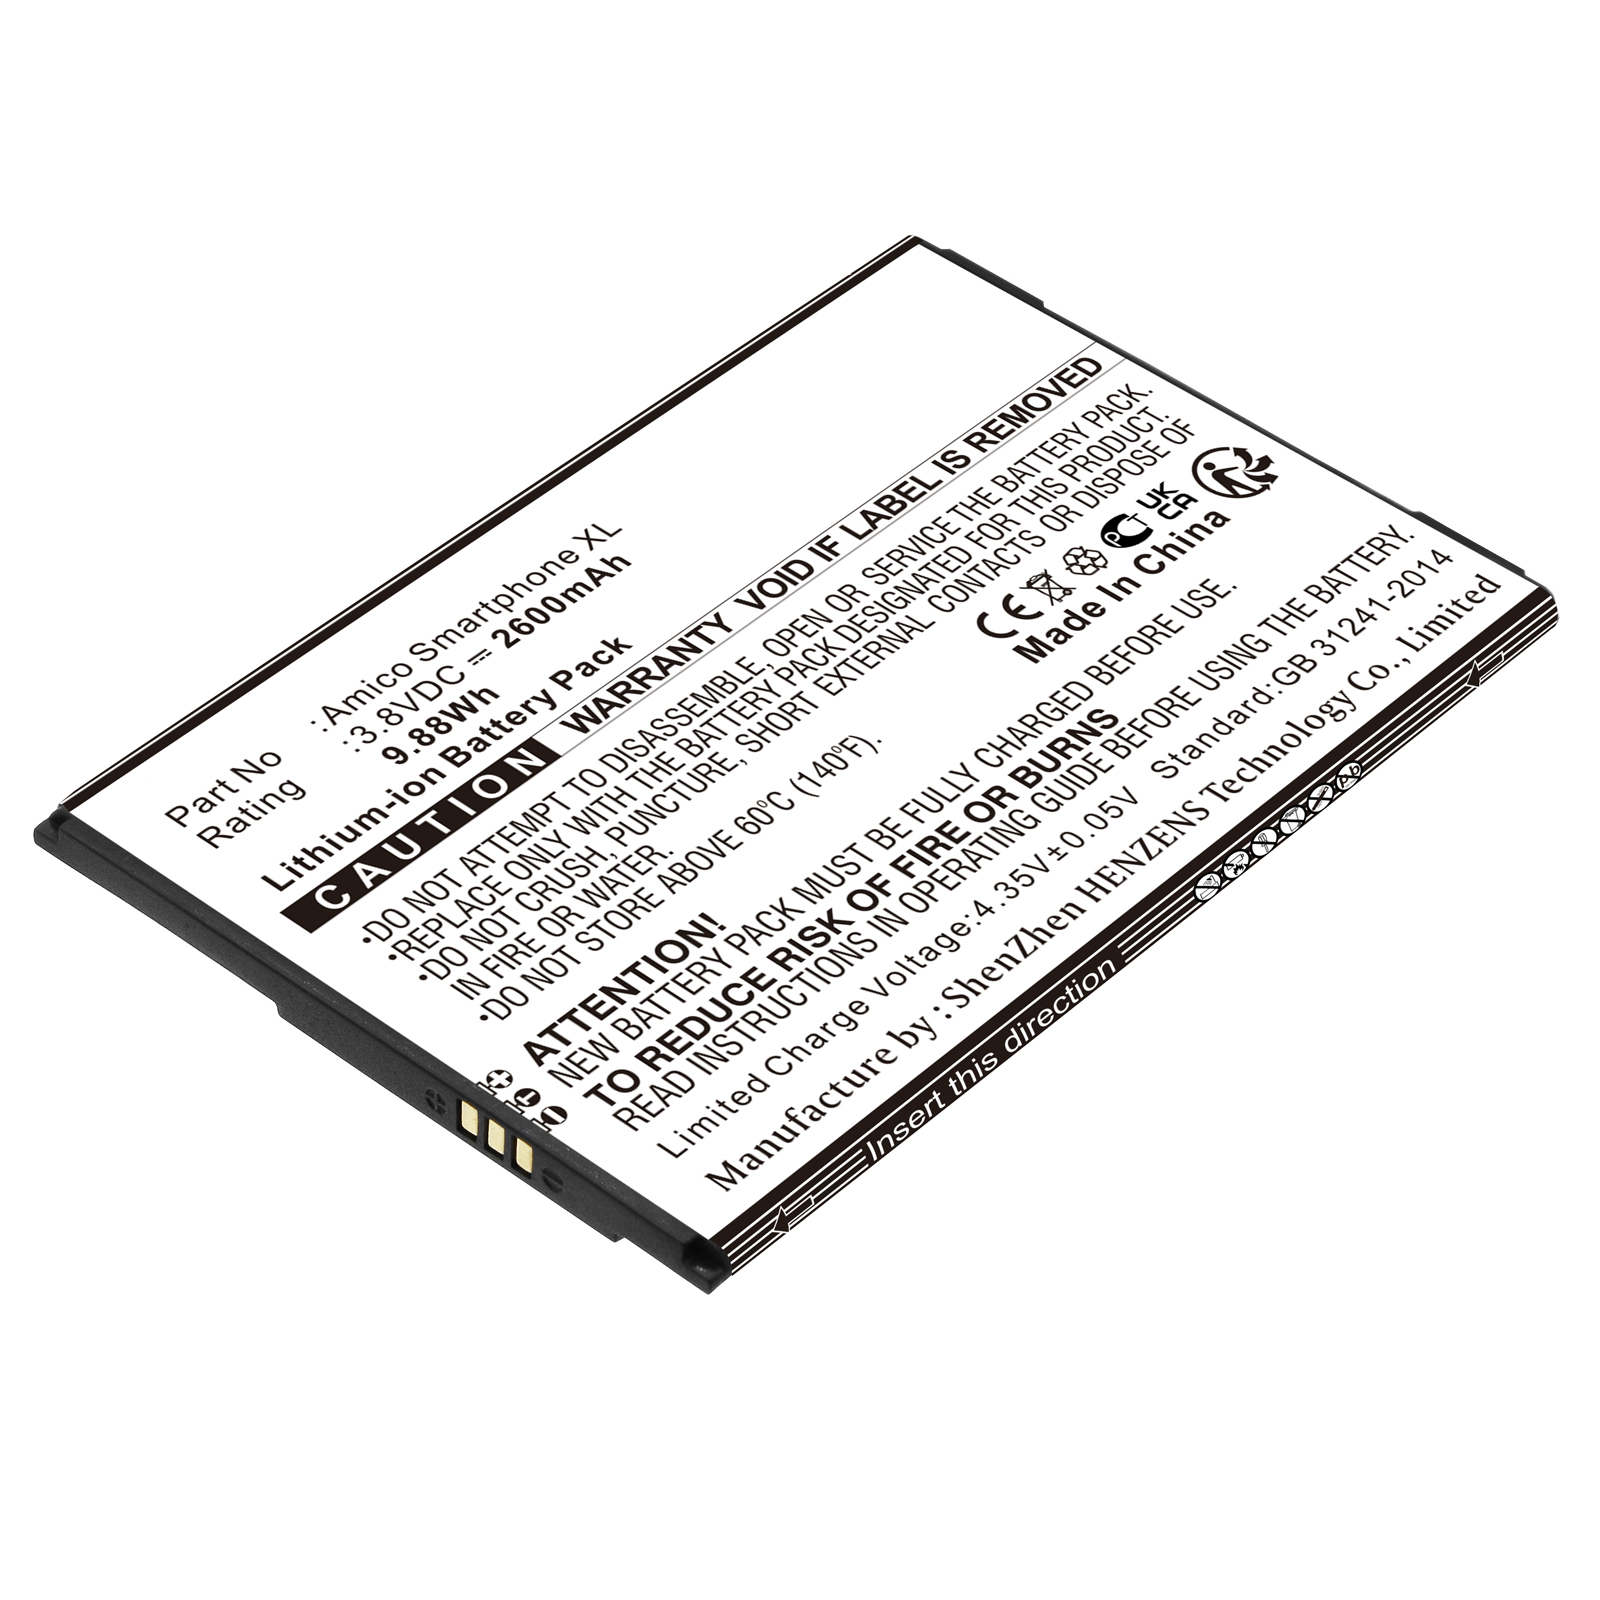 Synergy Digital Cell Phone Battery, Compatible with Brondi S602 Cell Phone Battery (Li-ion, 3.8V, 2600mAh)